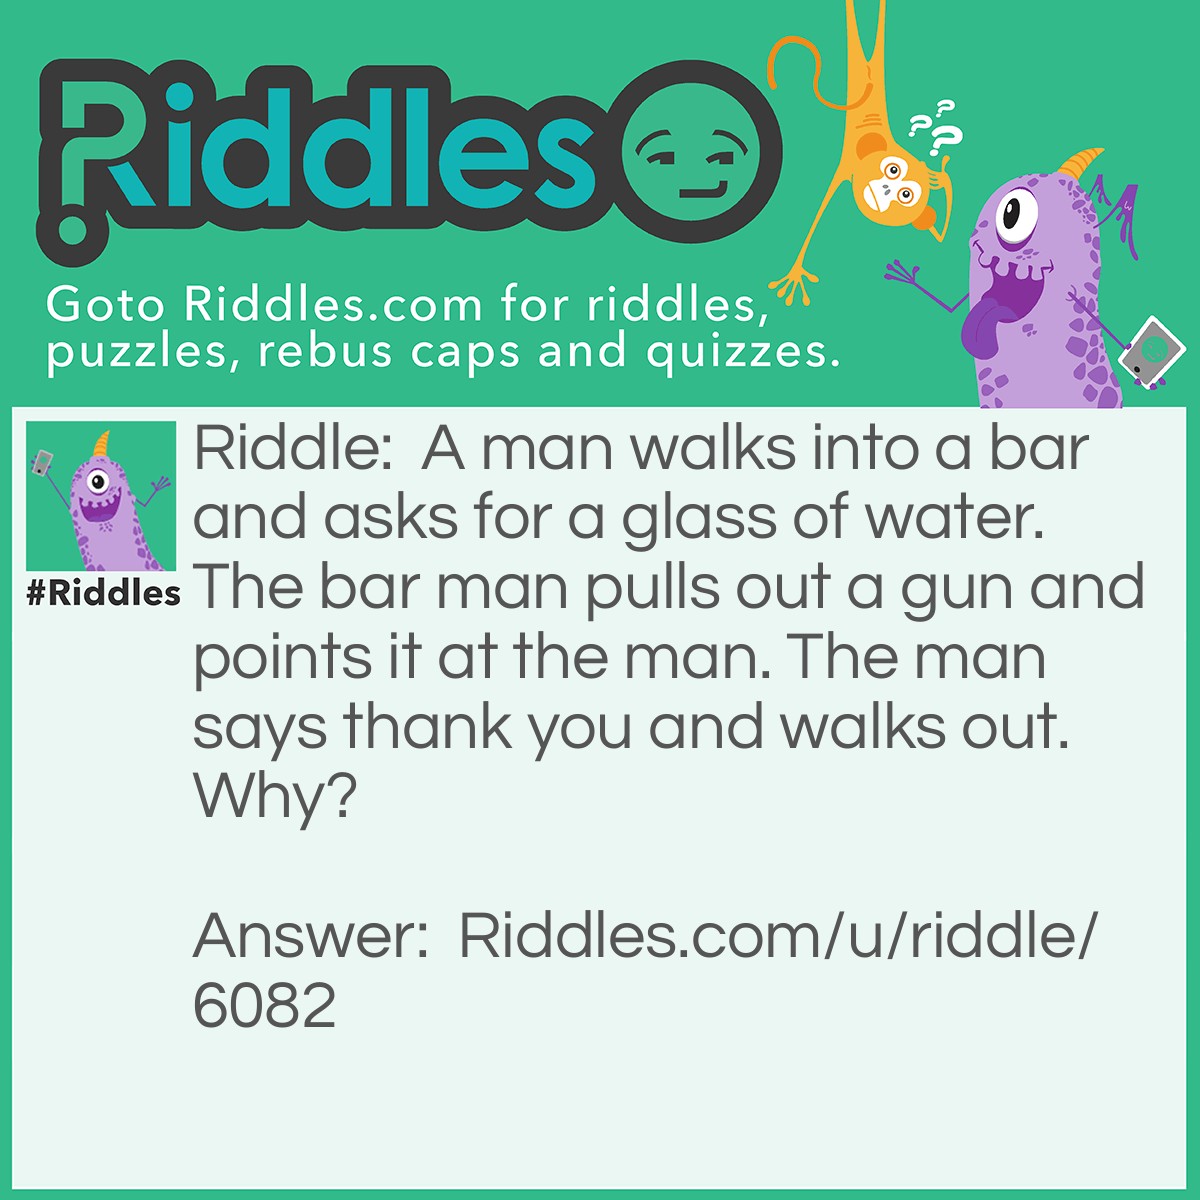 Riddle: A man walks into a bar and asks for a glass of water. The bar man pulls out a gun and points it at the man. The man says thank you and walks out. Why? Answer: The man had the hiccups, so the barman pulled out the gun to scare his hiccups away.